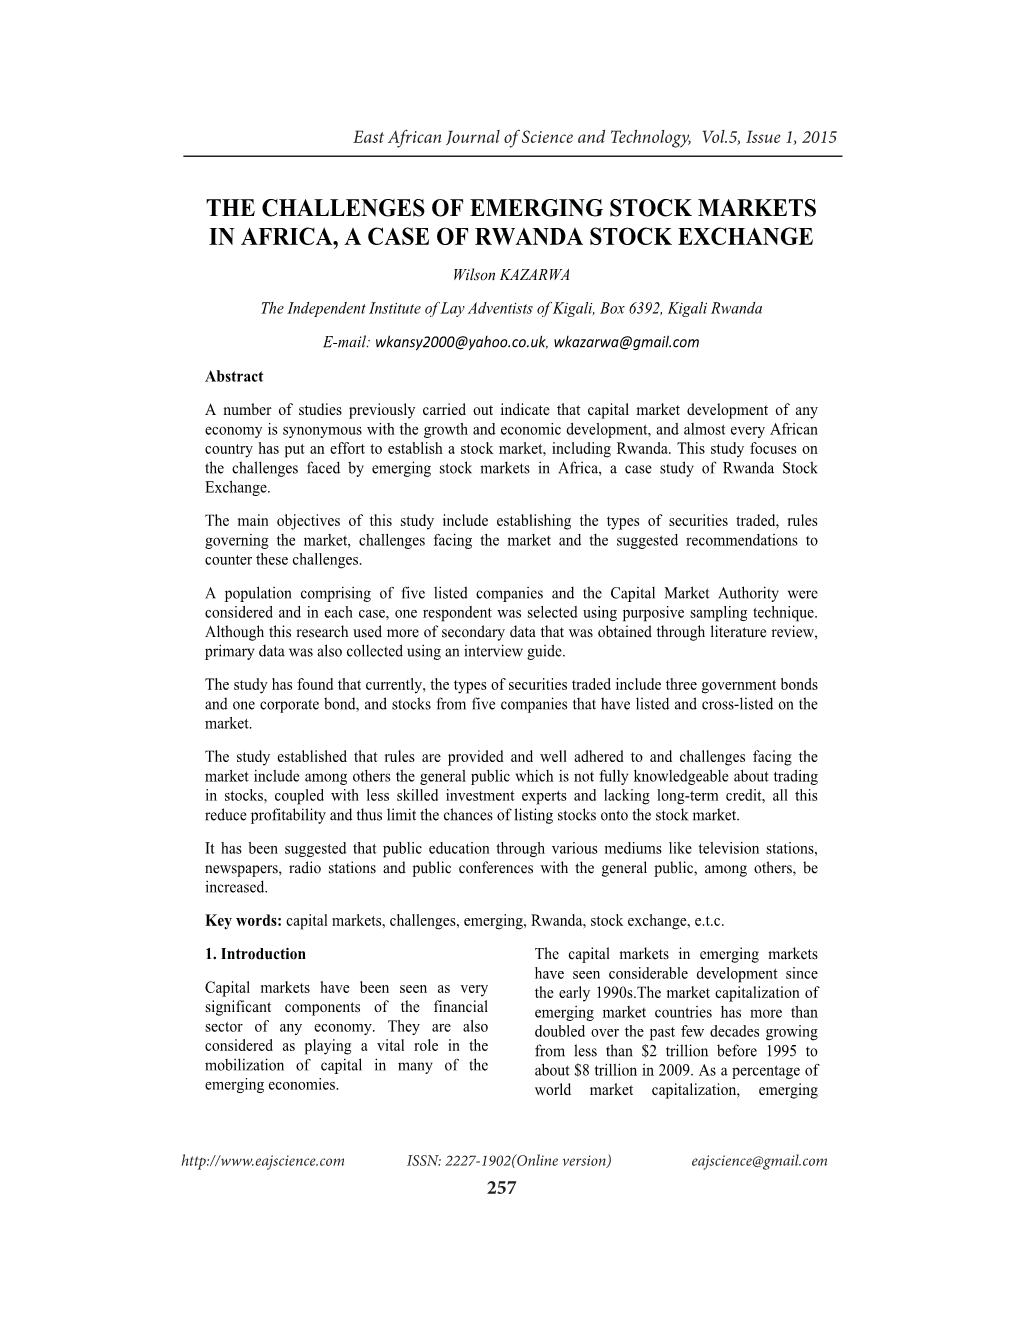 The Challenges of Emerging Stock Markets in Africa, a Case of Rwanda